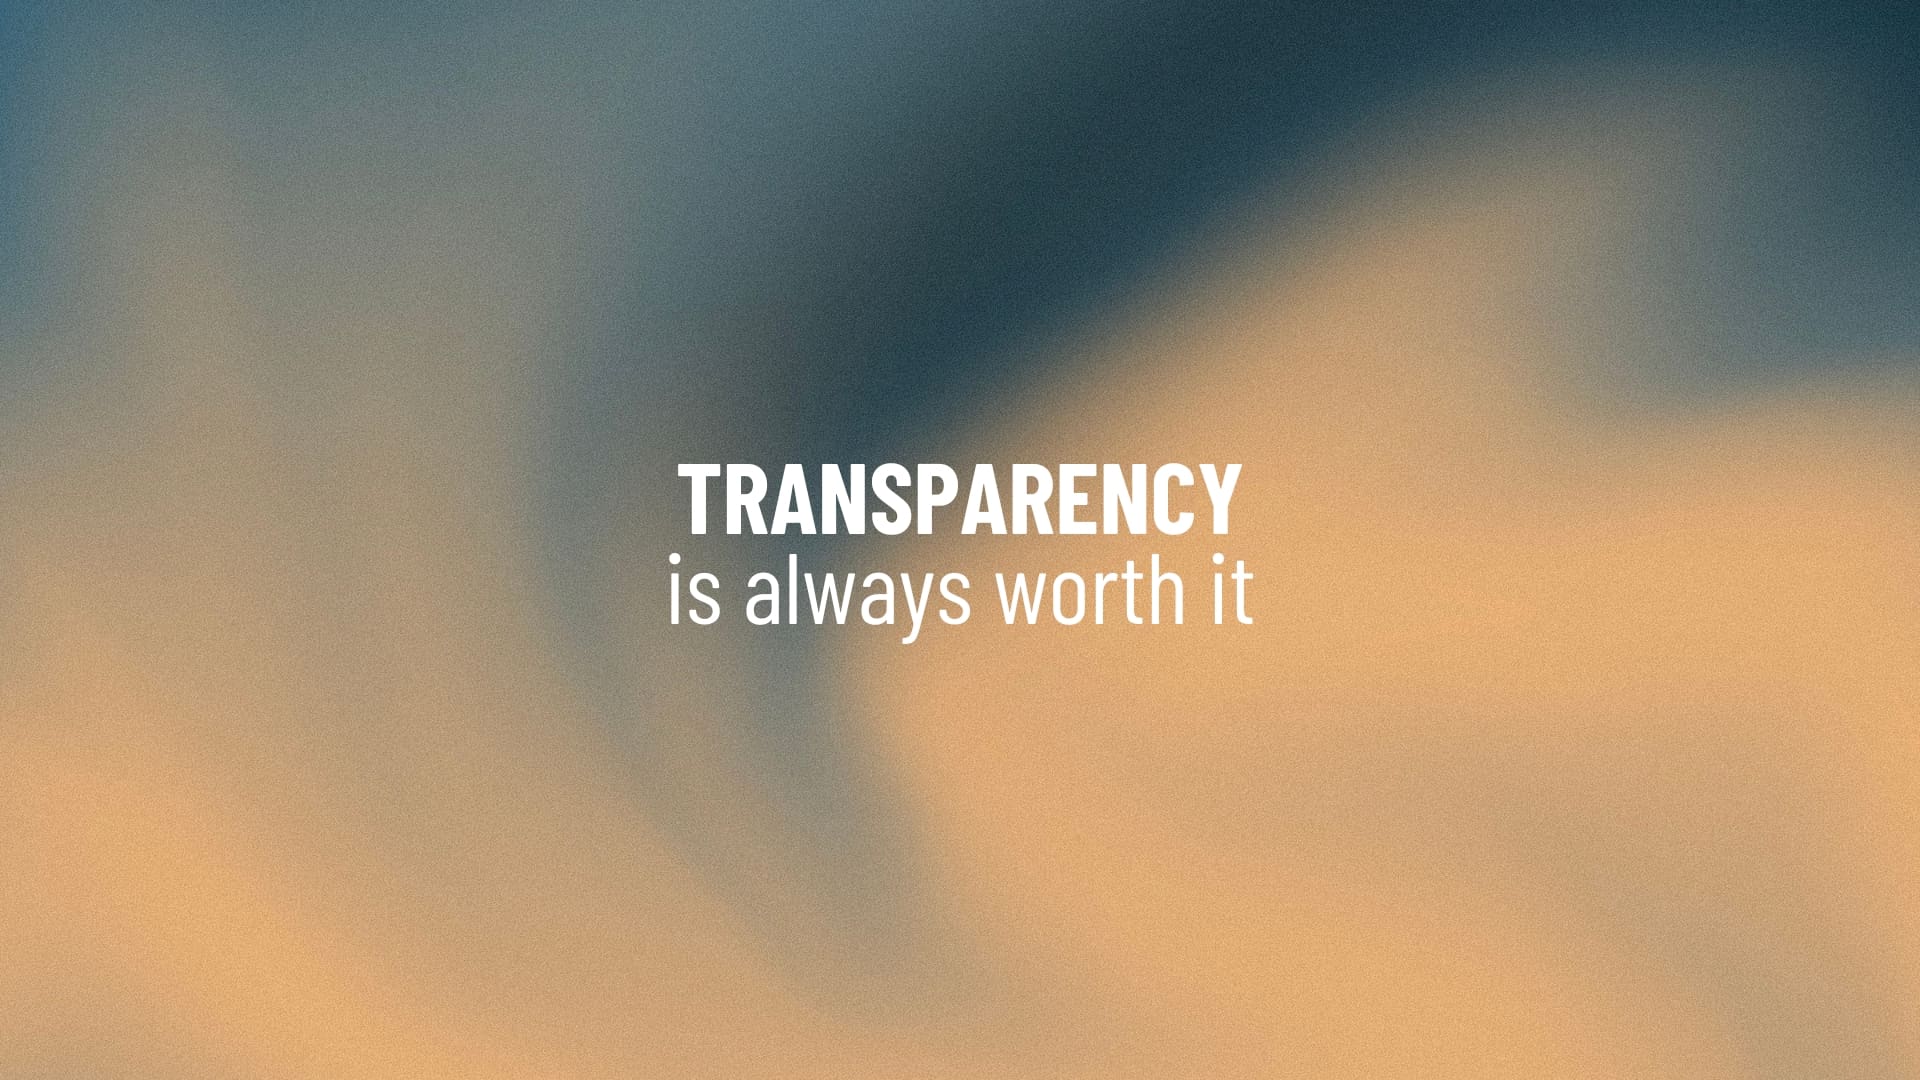 Transparency is always worth it.